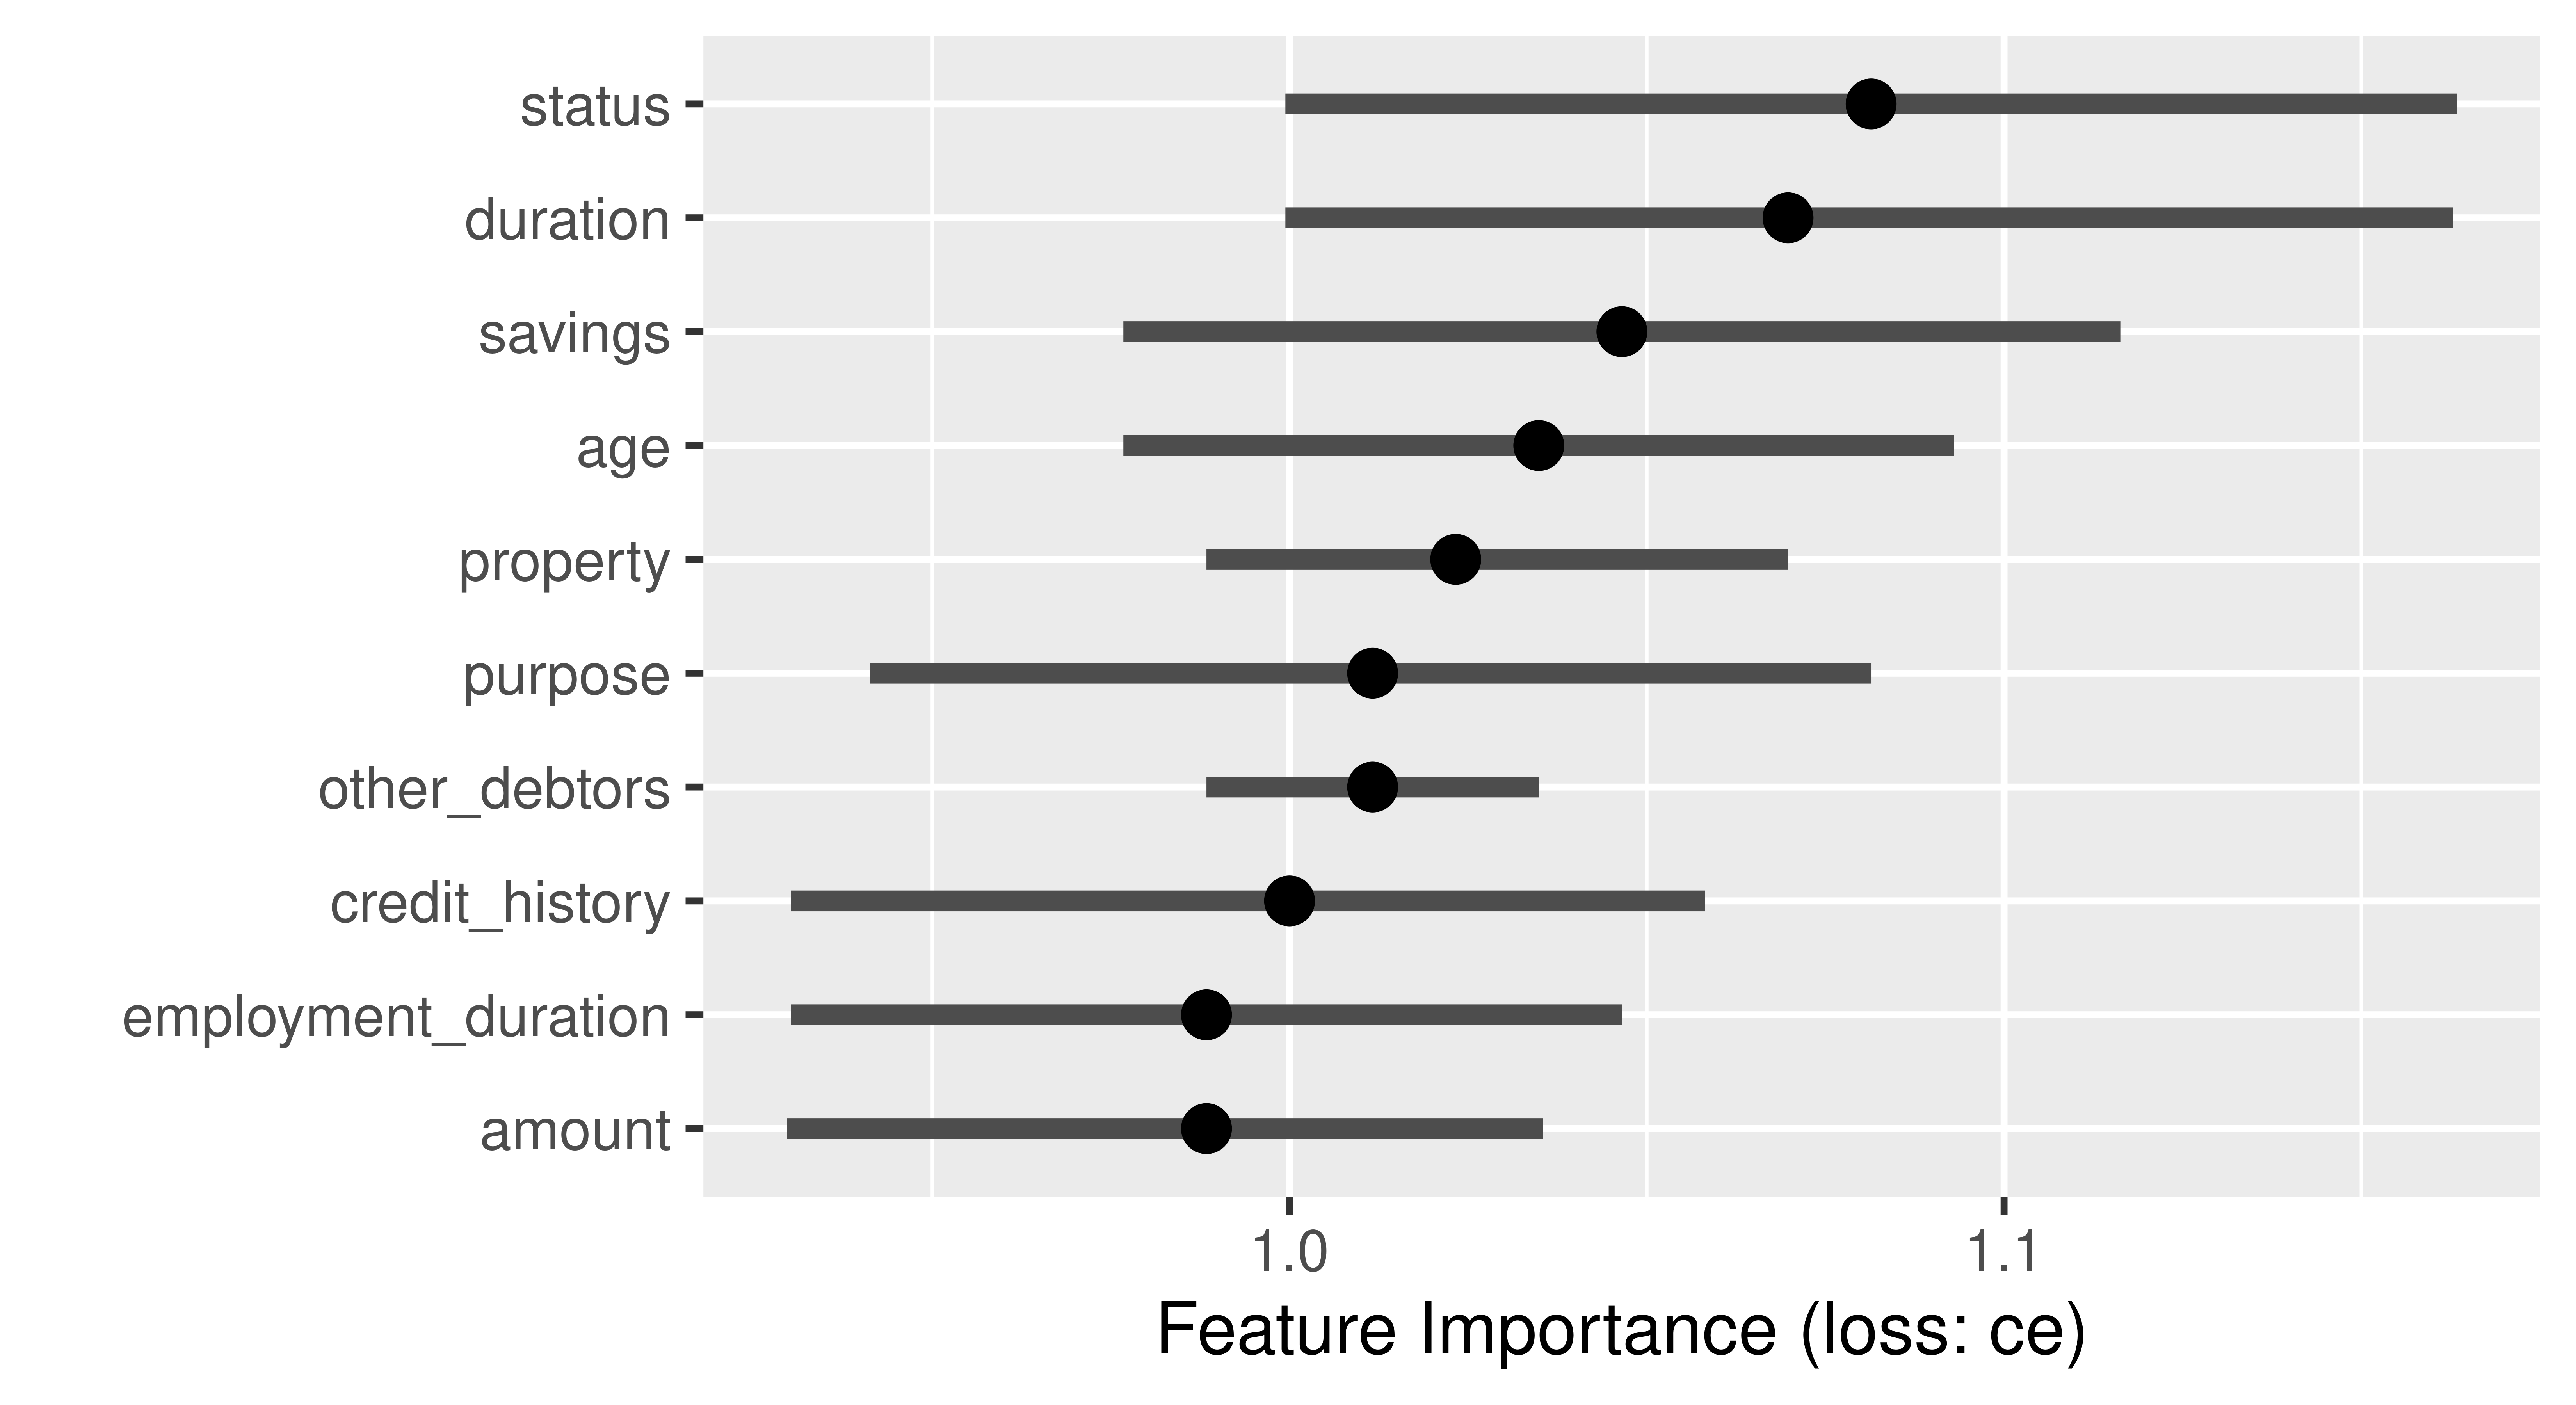 x-axis says 'Feature Importance (loss: ce)' and y-axis lists the features in the data. Plot shows 10 error bars, one for each feature, with solid black circles in the middle (the median importance value across the repetitions) and horizontal black lines on each row (from the 5% to 95% quantile of the feature importance values). Top three most important features are `status`, `duration`, and `savings`.